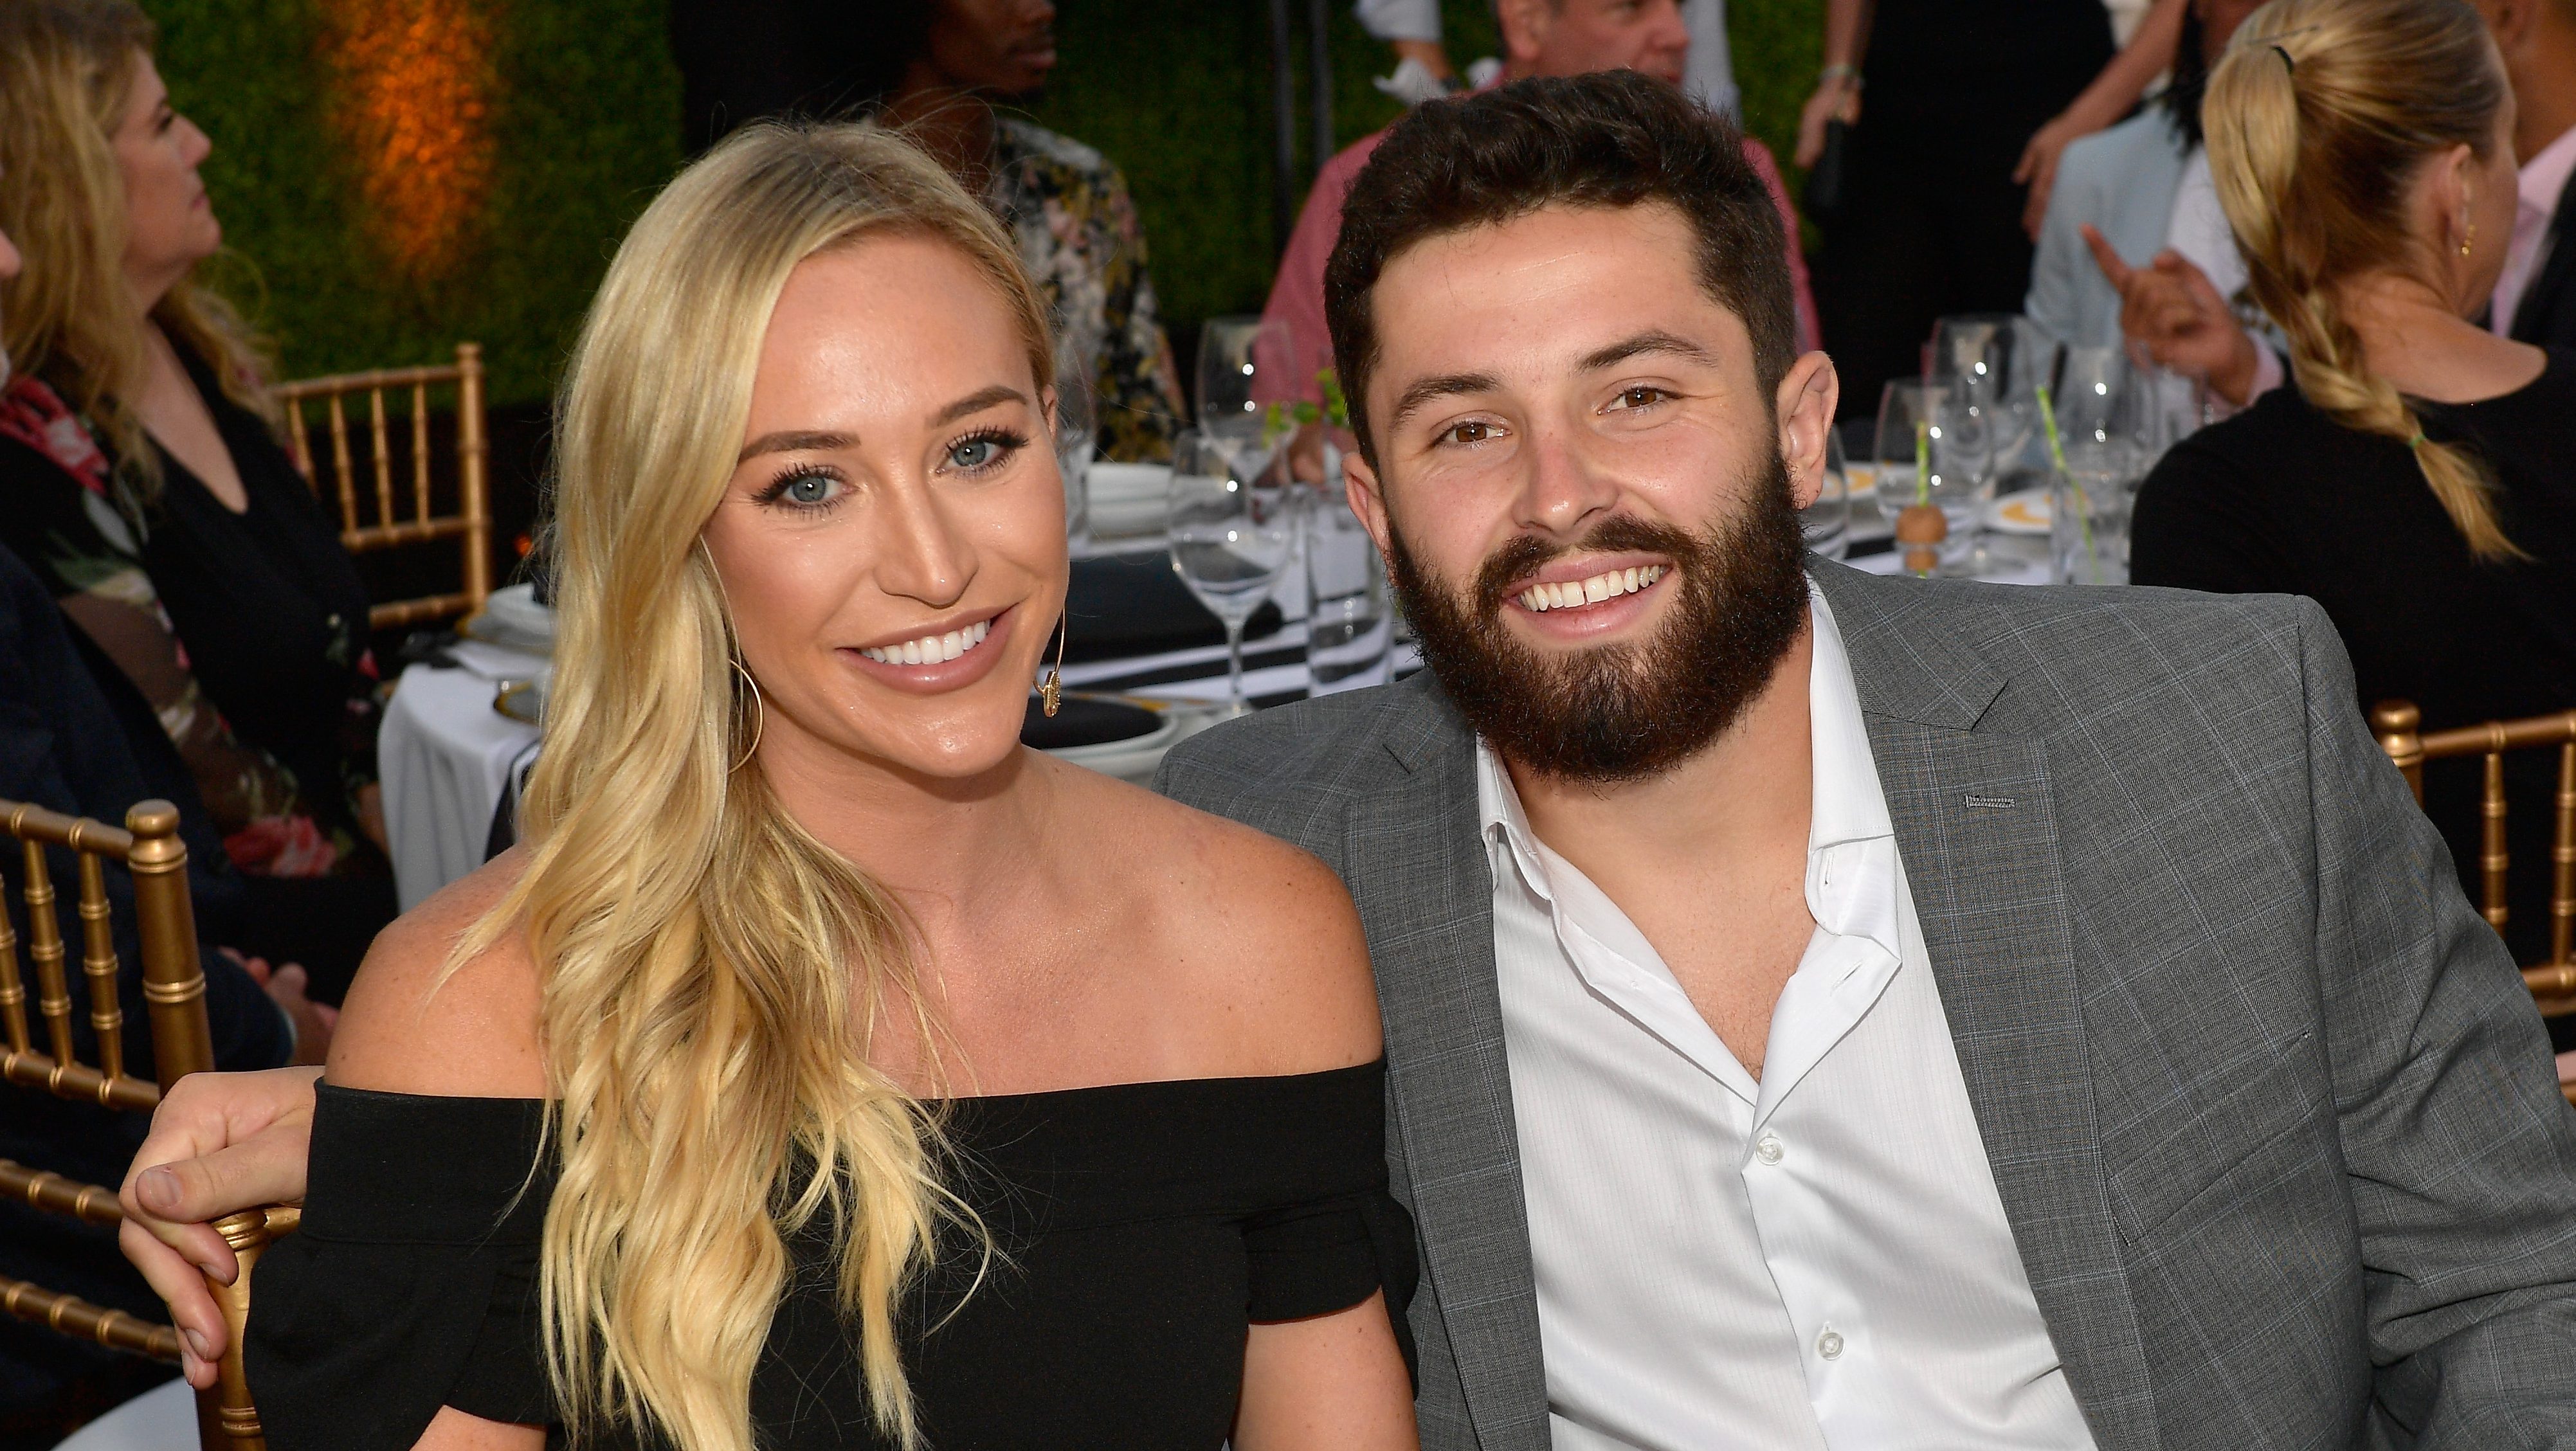 Browns QB Baker Mayfield Caught in Viral Wedding Video | Heavy.com